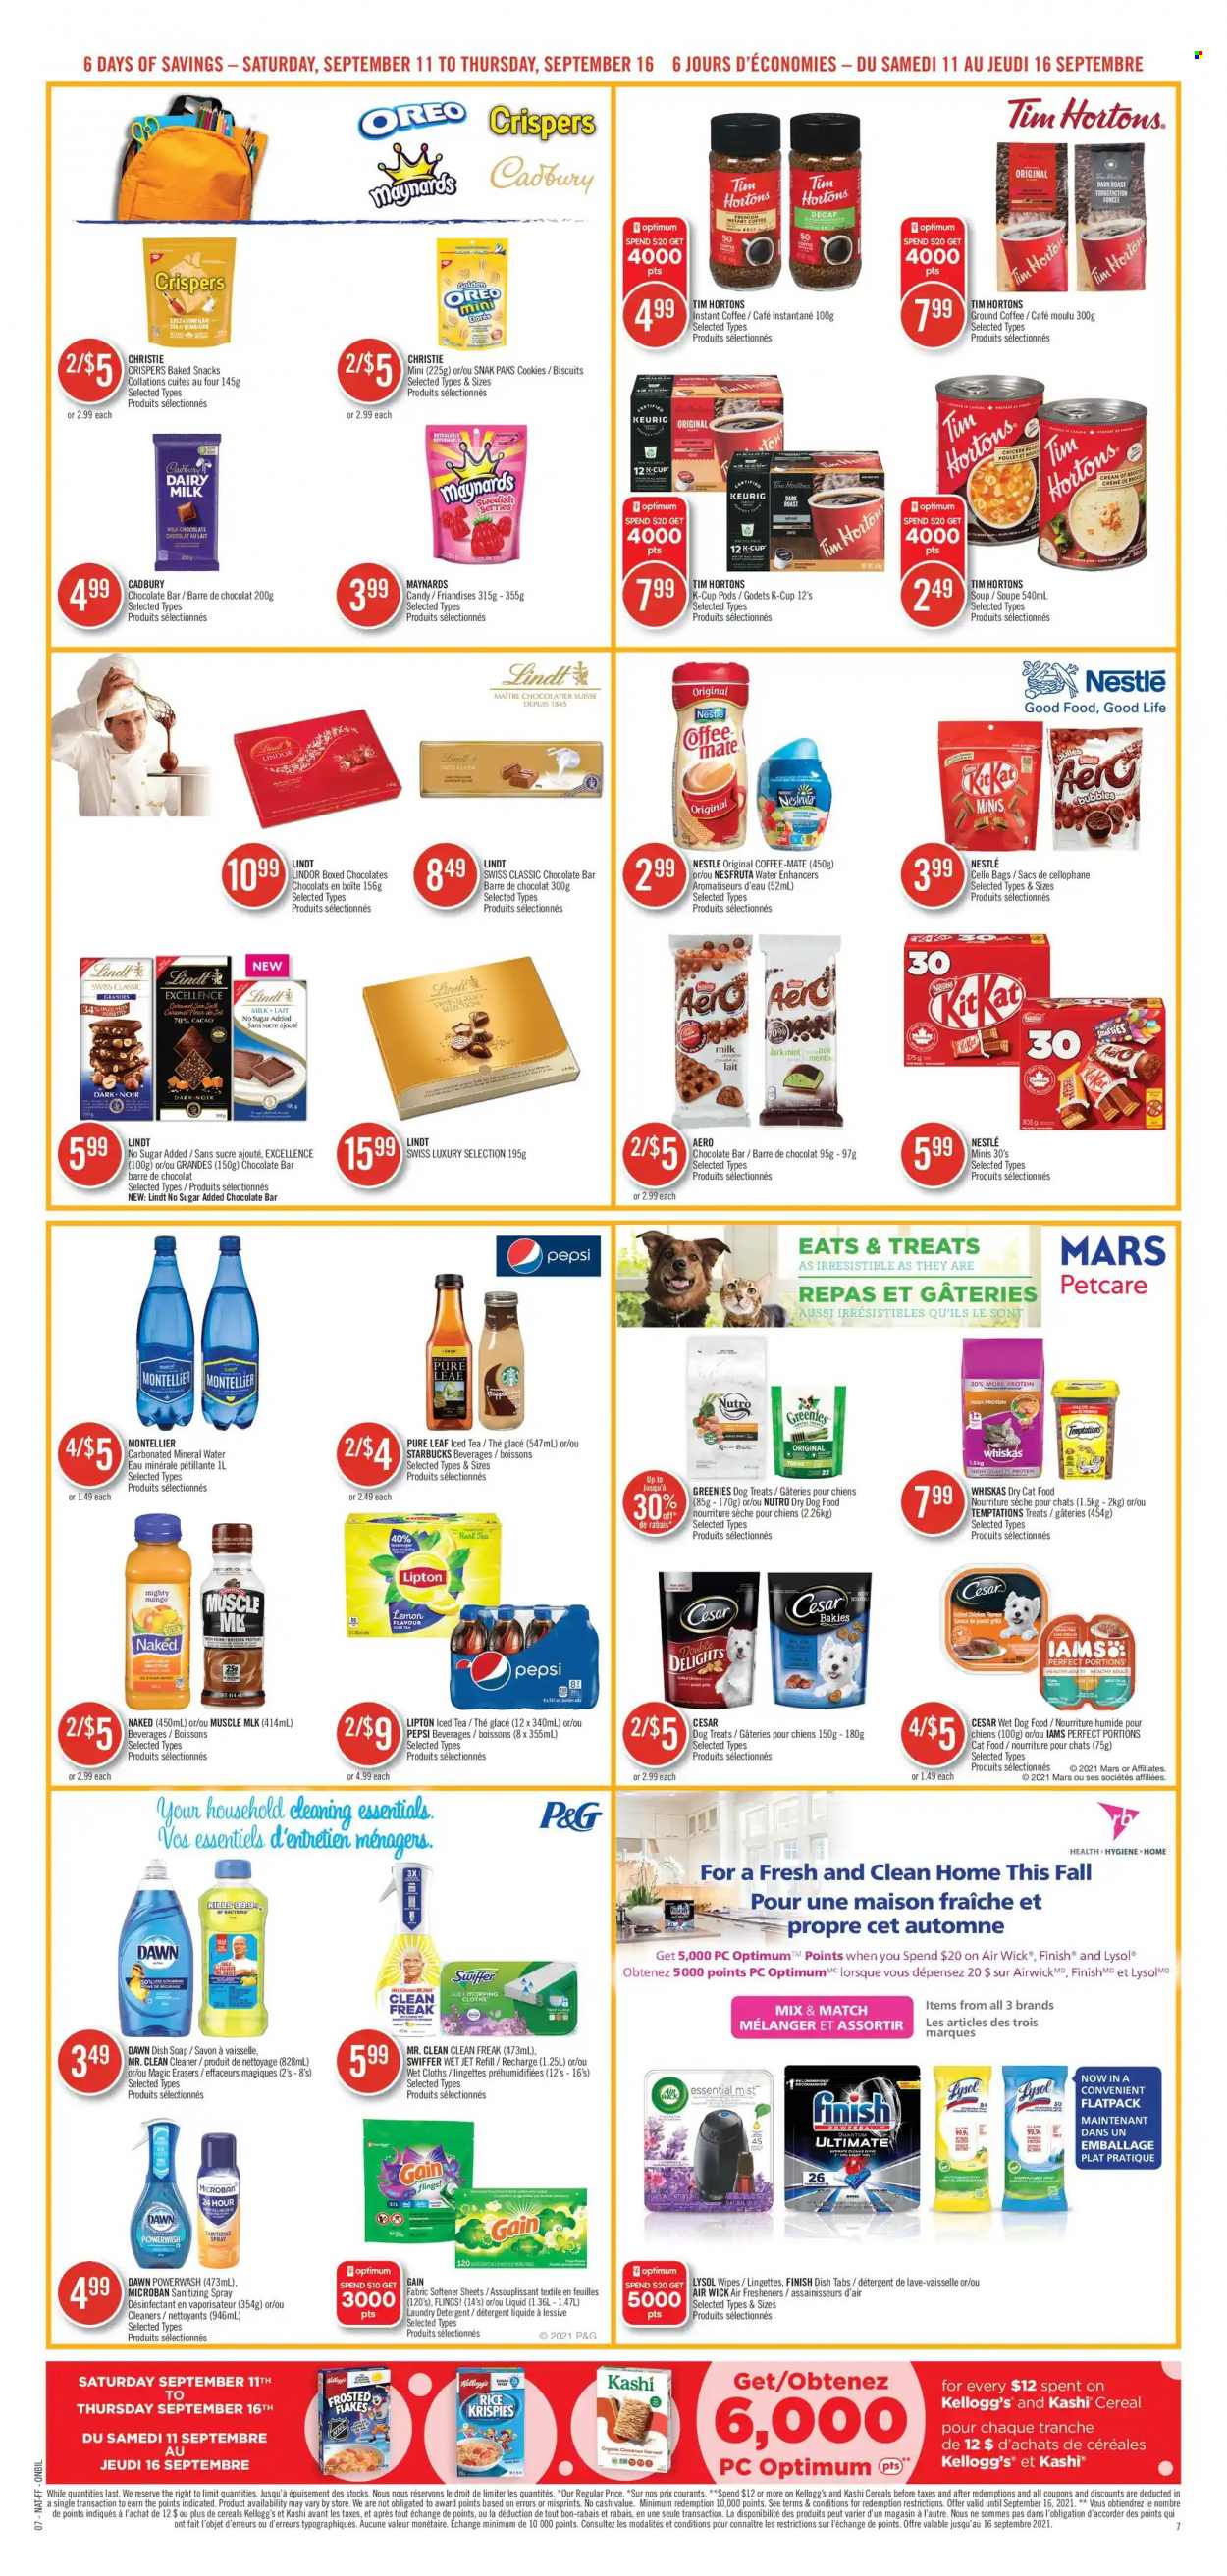 thumbnail - Shoppers Drug Mart Flyer - September 11, 2021 - September 16, 2021 - Sales products - cookies, milk chocolate, snack, Mars, Kellogg's, biscuit, Cadbury, Dairy Milk, chocolate bar, mango, soup, cereals, Rice Krispies, Frosted Flakes, Good Life, cinnamon, caramel, Pepsi, ice tea, mineral water, Pure Leaf, instant coffee, ground coffee, coffee capsules, Starbucks, K-Cups, Keurig, wipes, Gain, cleaner, Lysol, Swiffer, fabric softener, laundry detergent, Jet, soap, Nestlé, Oreo, detergent, Lipton, Whiskas, Lindt, Lindor. Page 9.